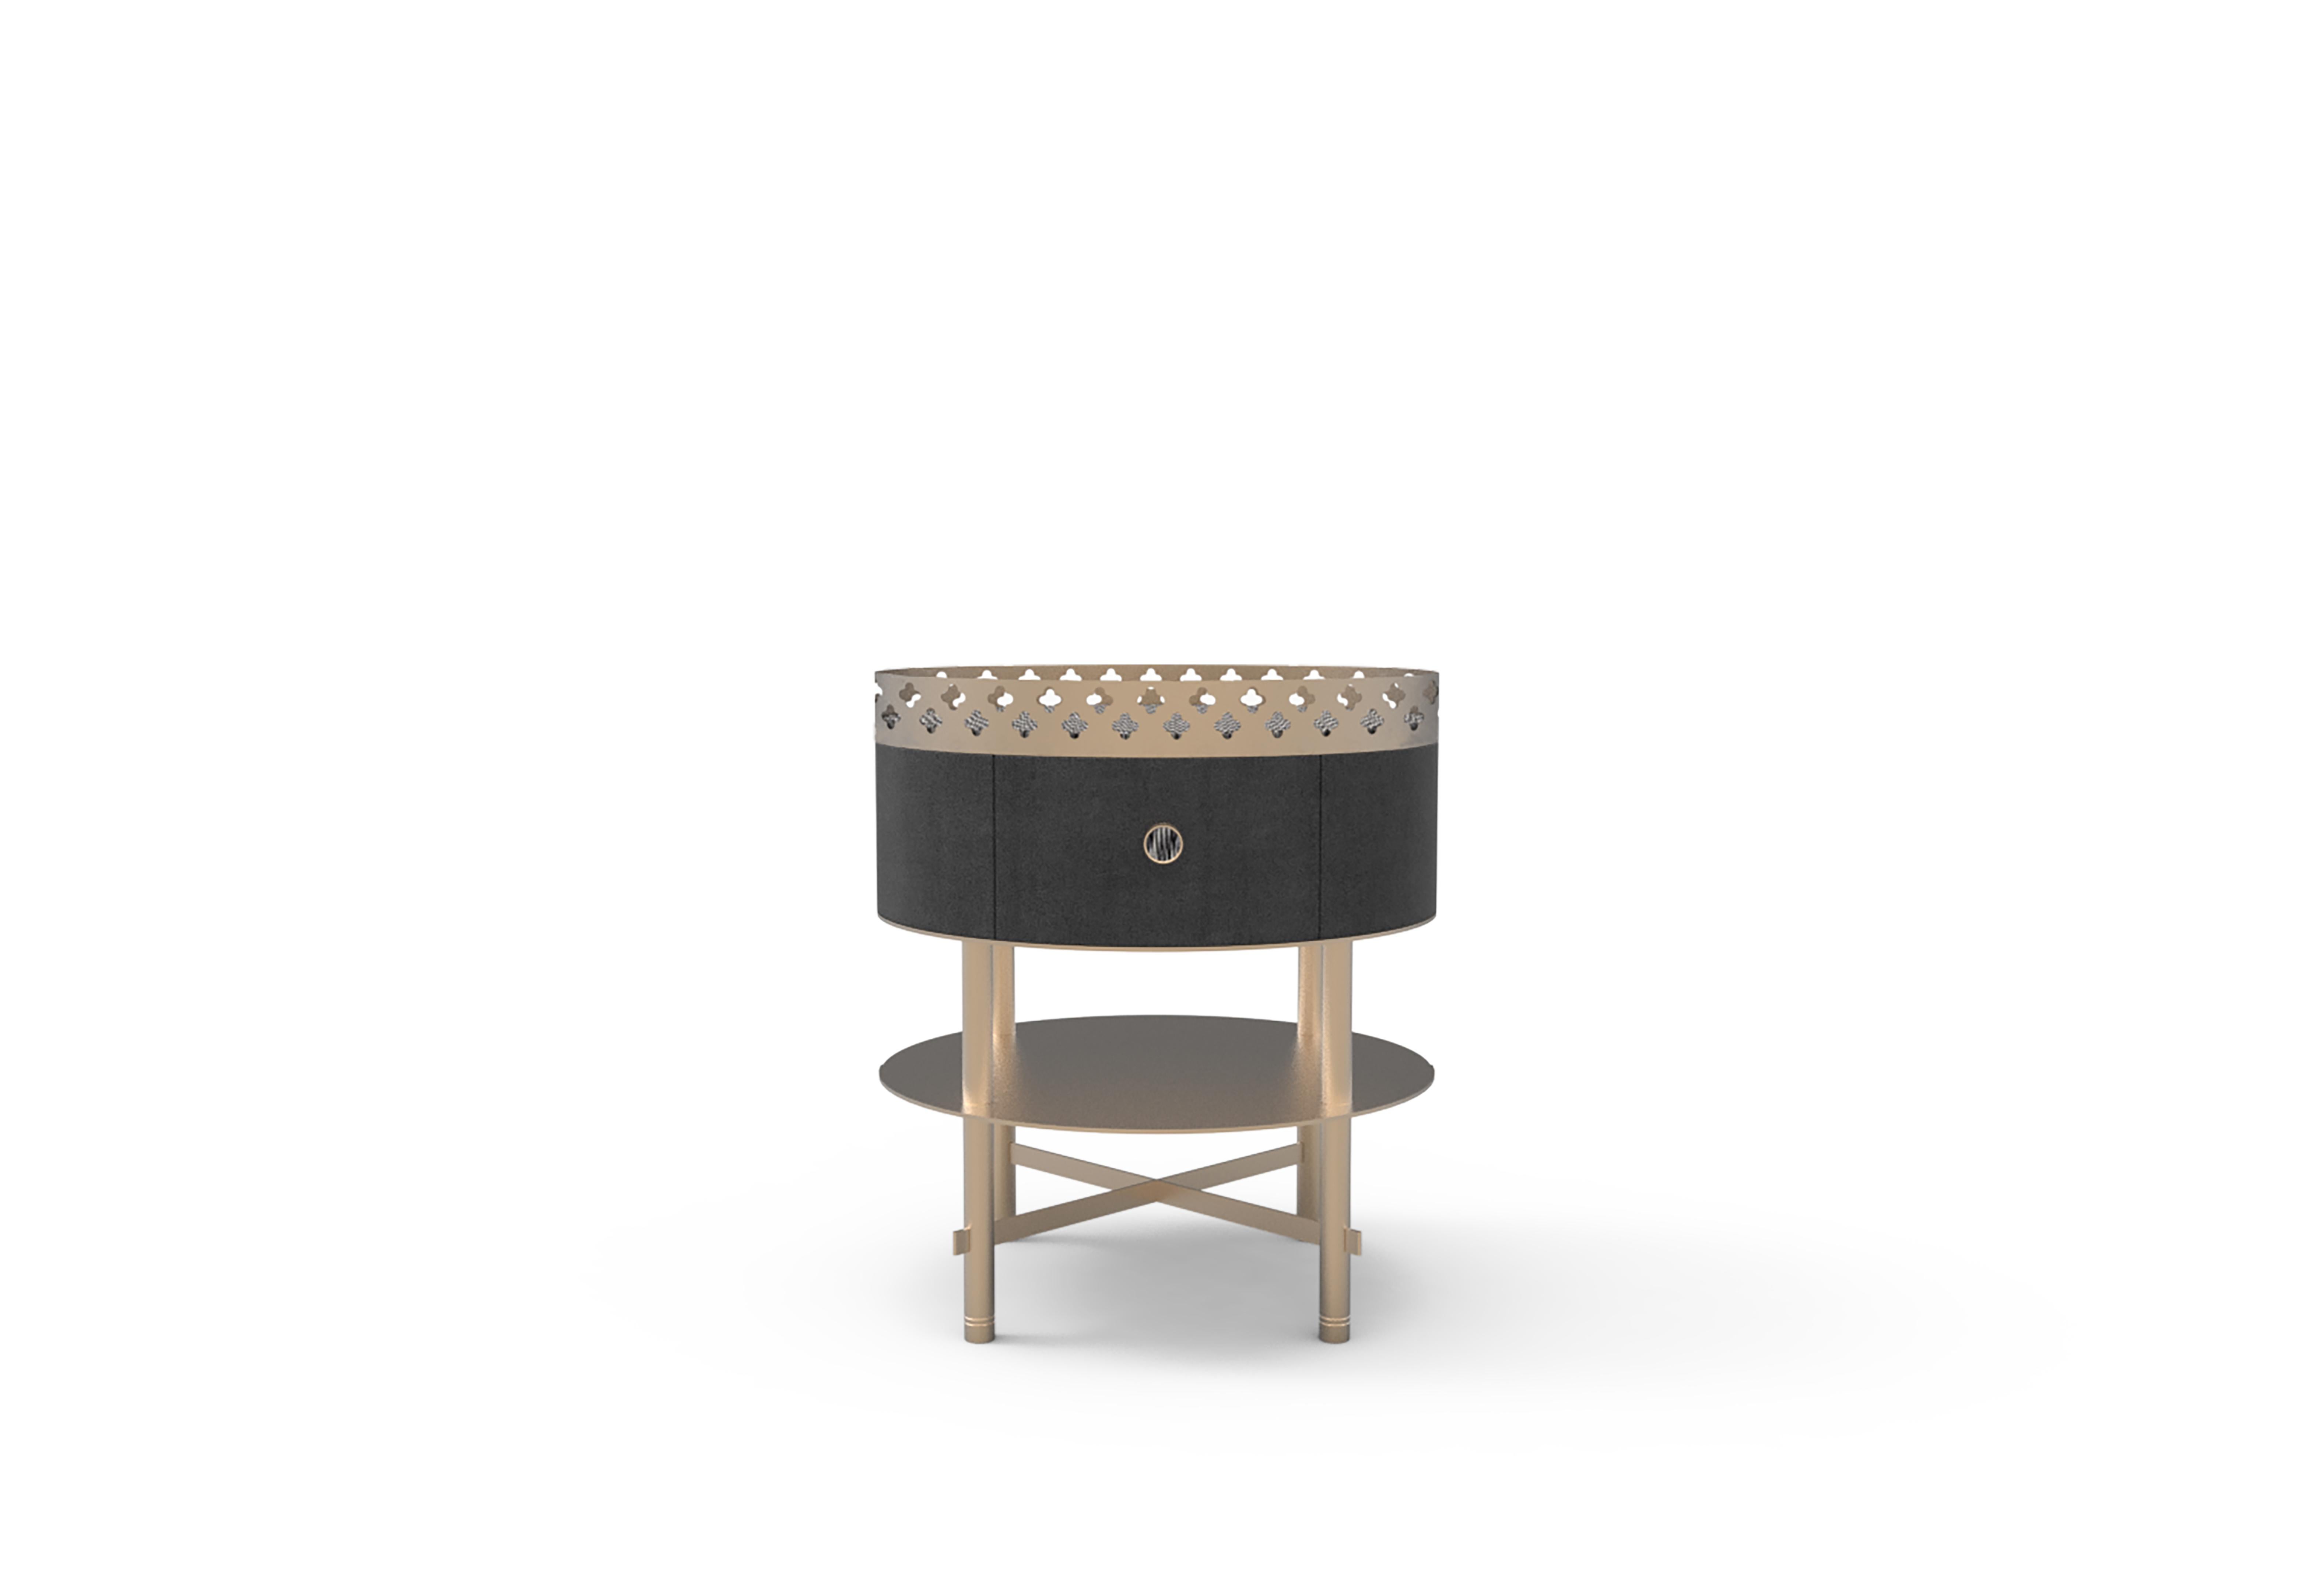 Round side table composed by a wooden compartment with drawer, top shelf in metal, lower shelf in metal. Laser-cut interlocking tubular structure in metal and laser-cut metal sheet with flower motifs finished manually.